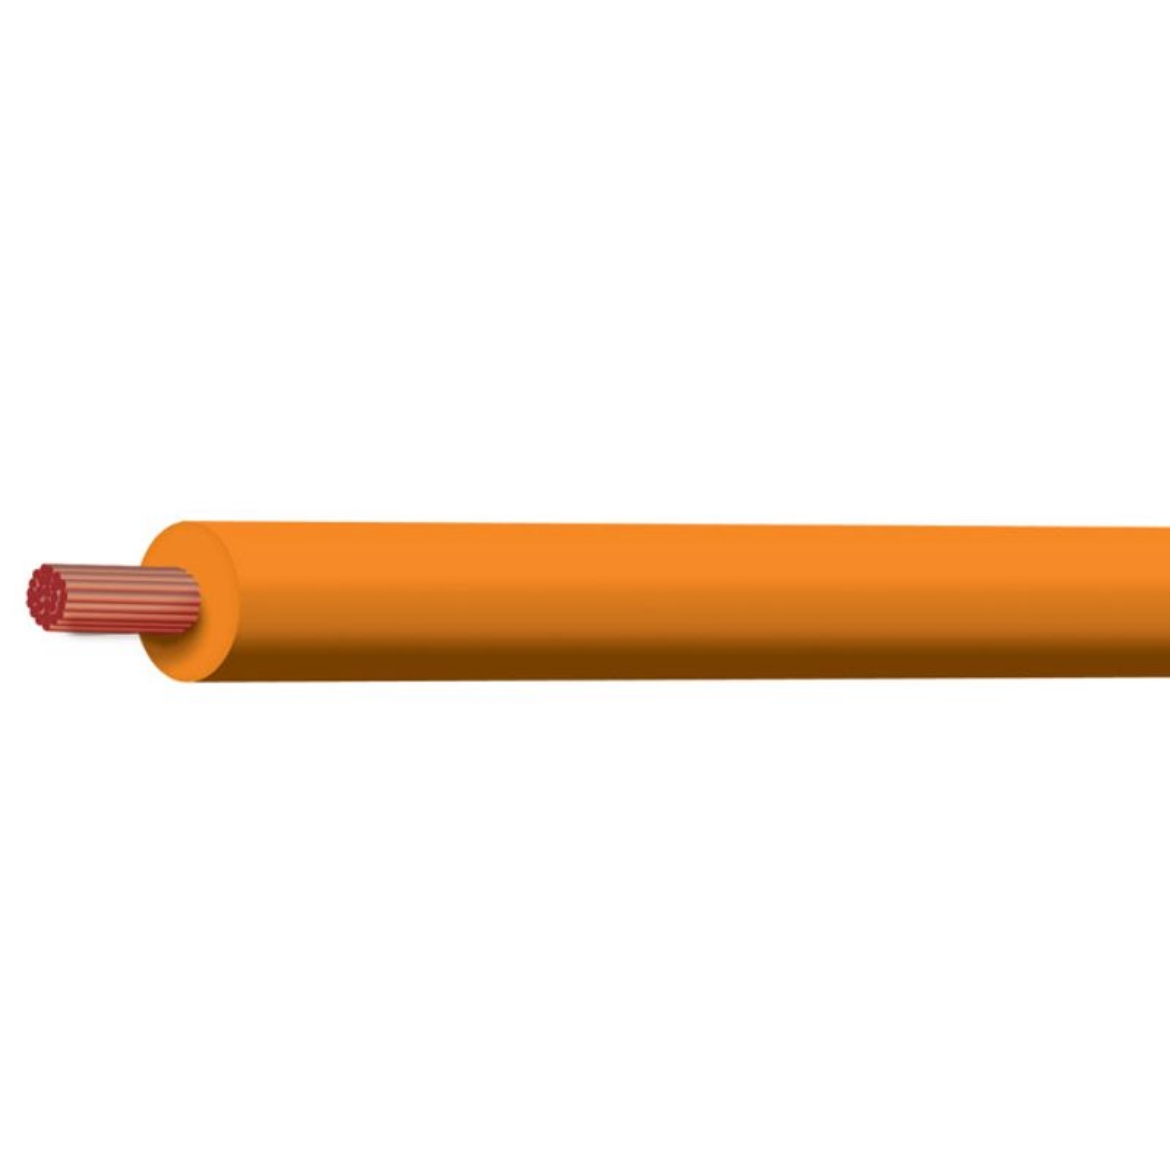 Picture of TYCAB 4MM SINGLE CORE CABLE 15A ORANGE - 30M ROLL